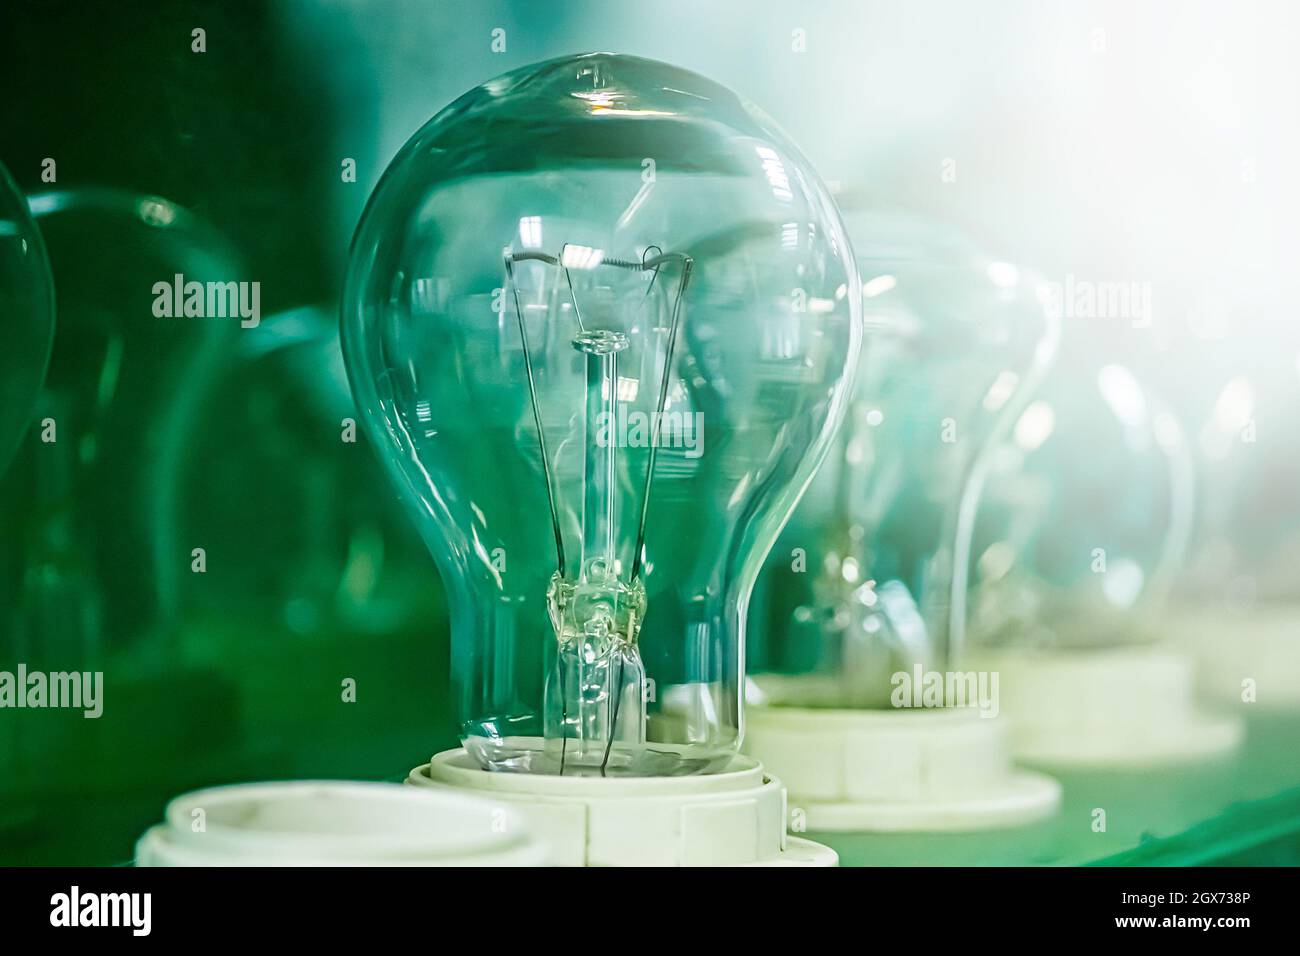 Old incandescent light bulb on green background. Samples of lamps in electronics store. Outdated technology concept. Stock Photo